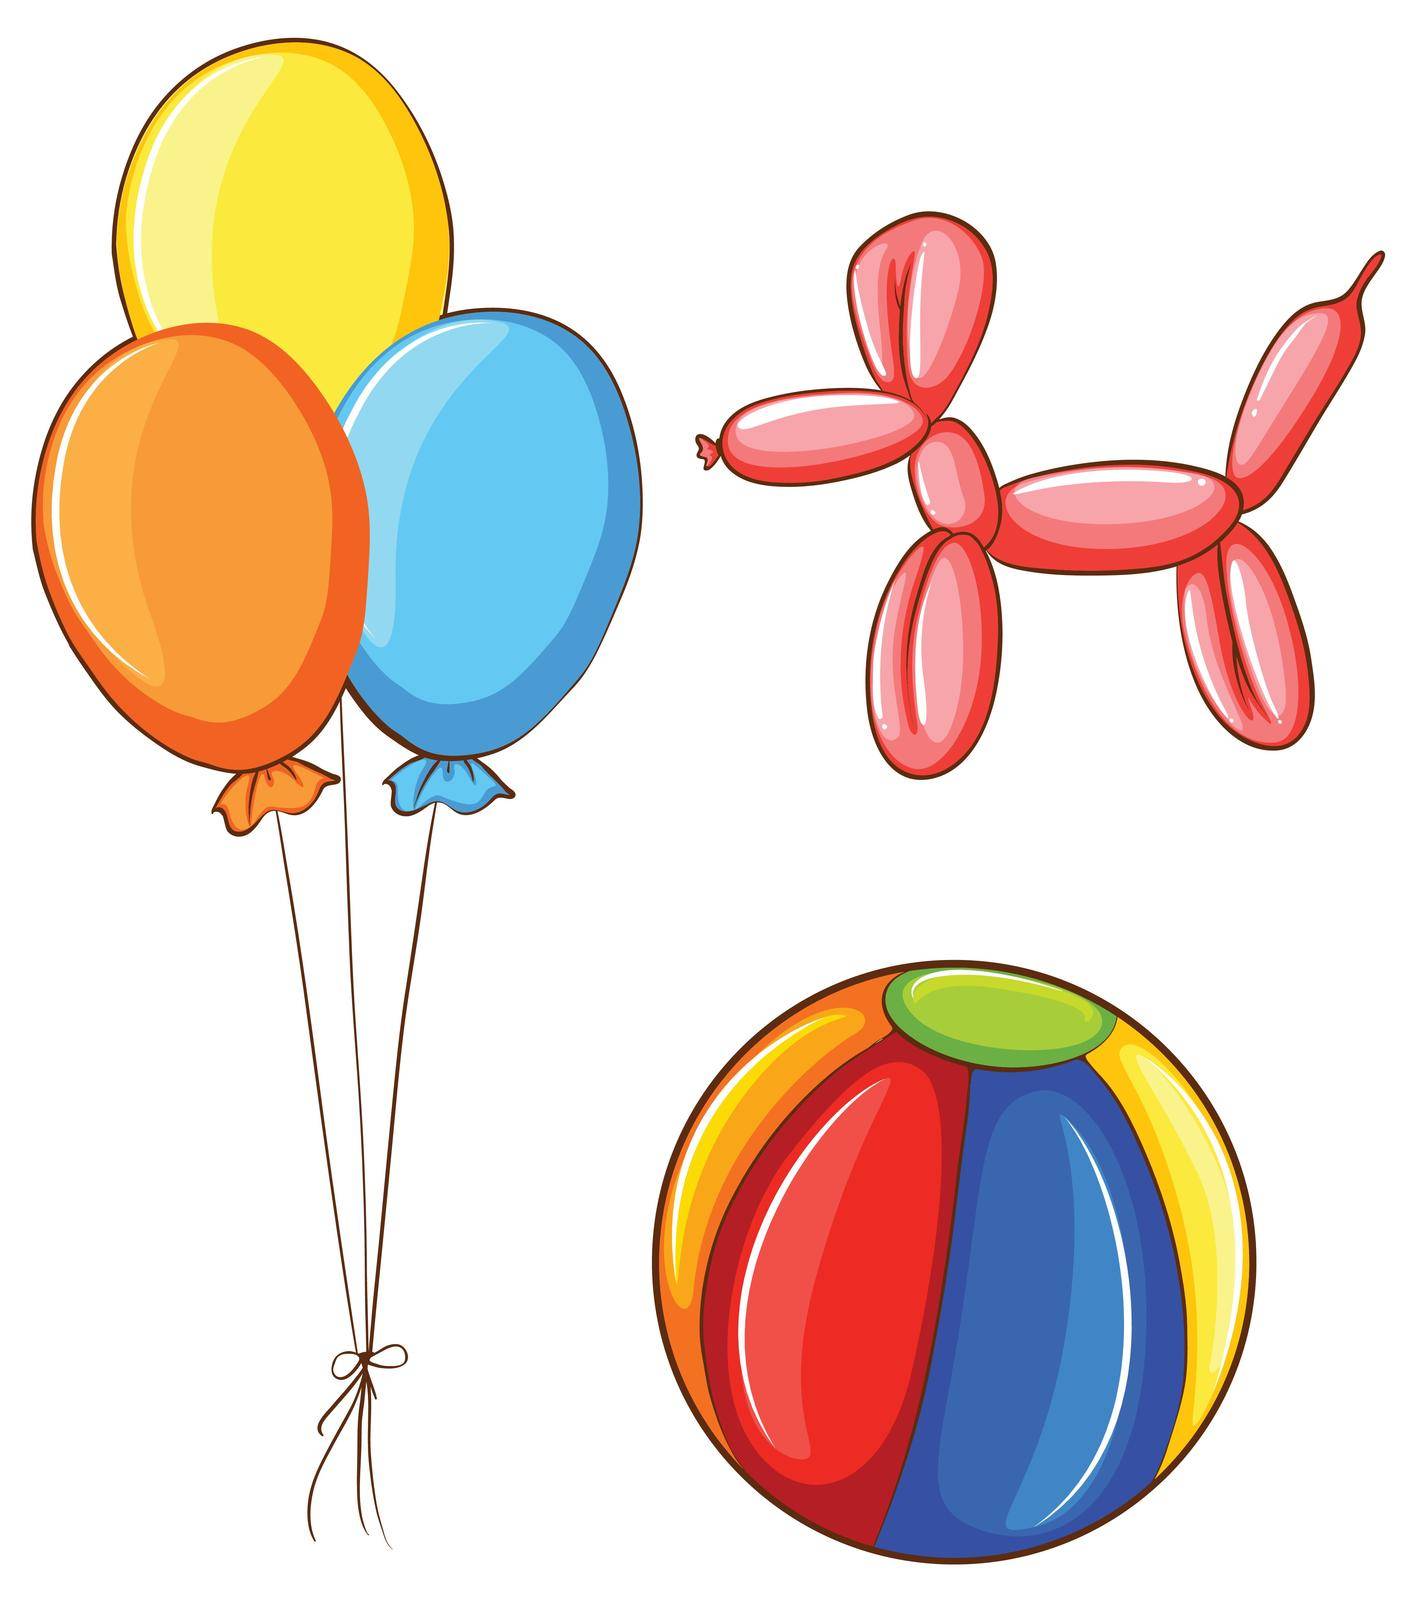 Illustration of a ball and balloons